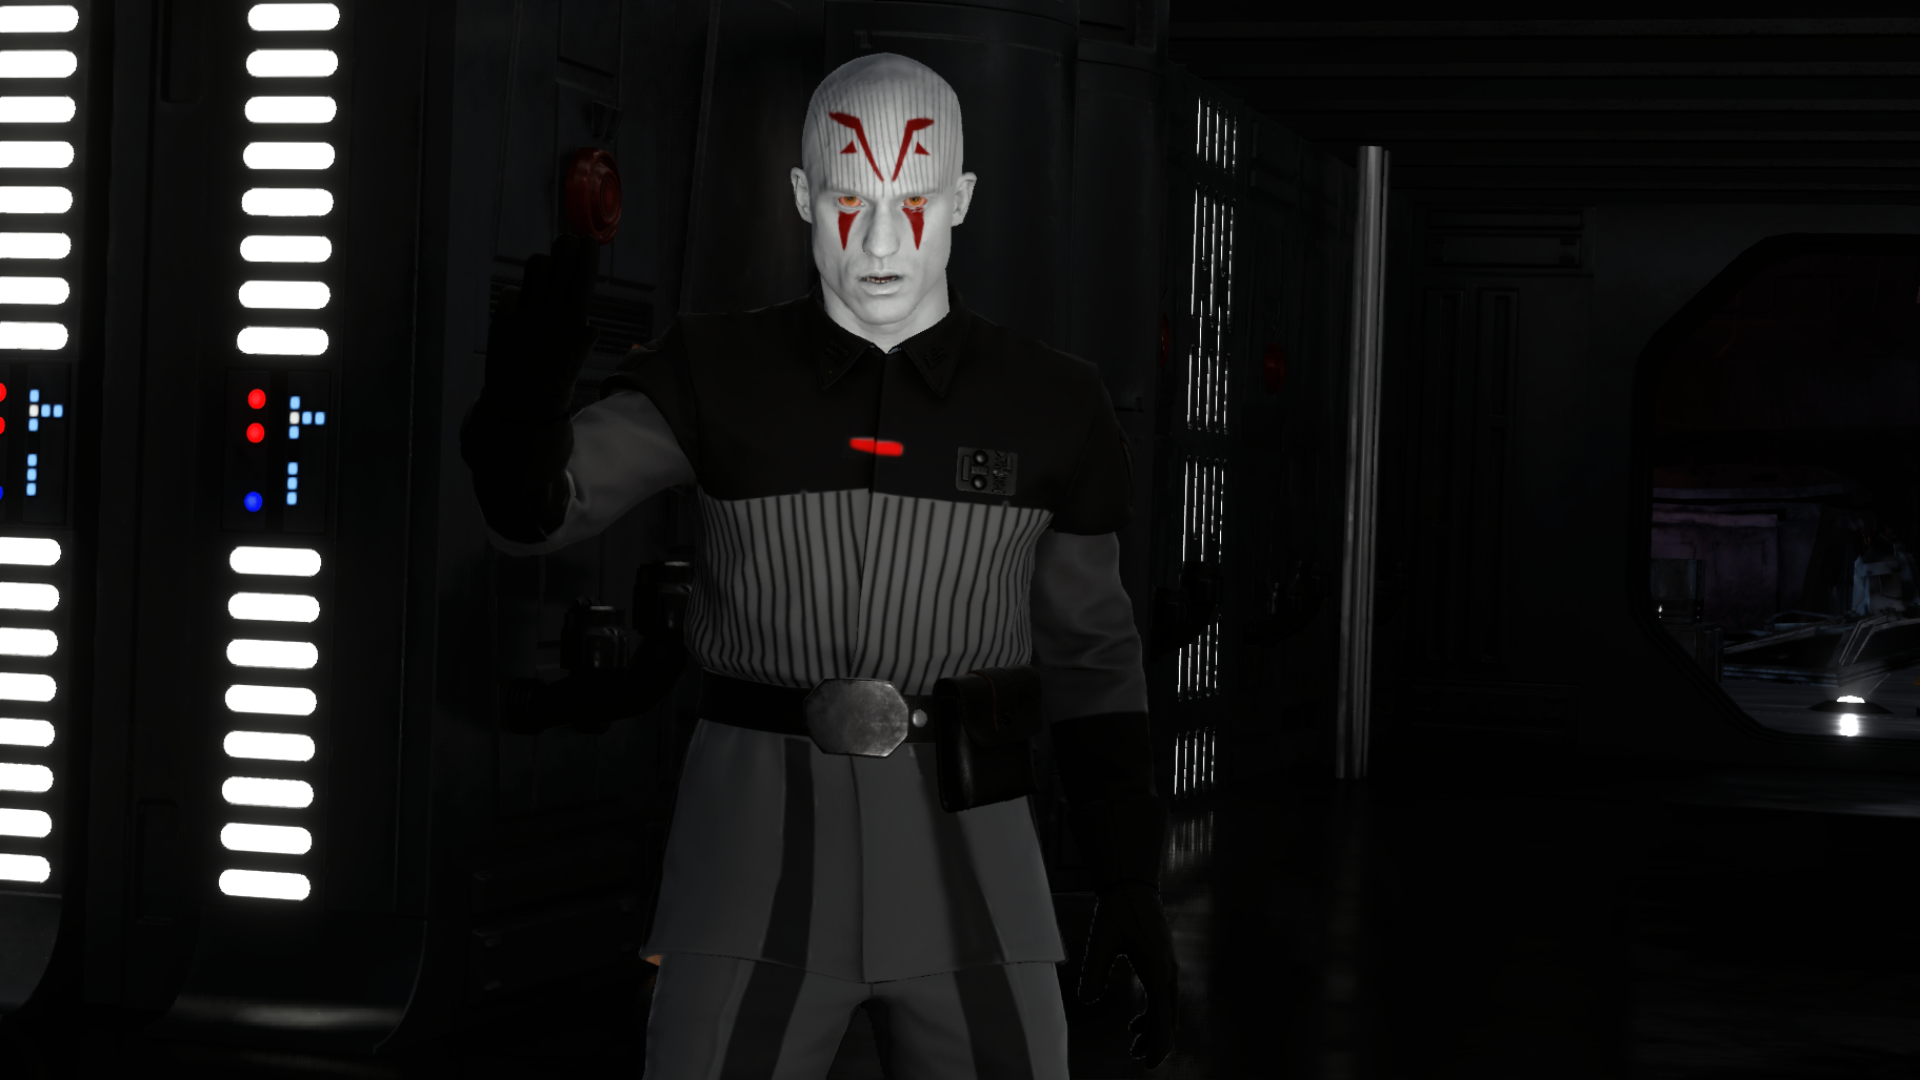 Grand Inquisitor From Star Wars Rebels at Star Wars: Battlefront (2015) Nexus and Community